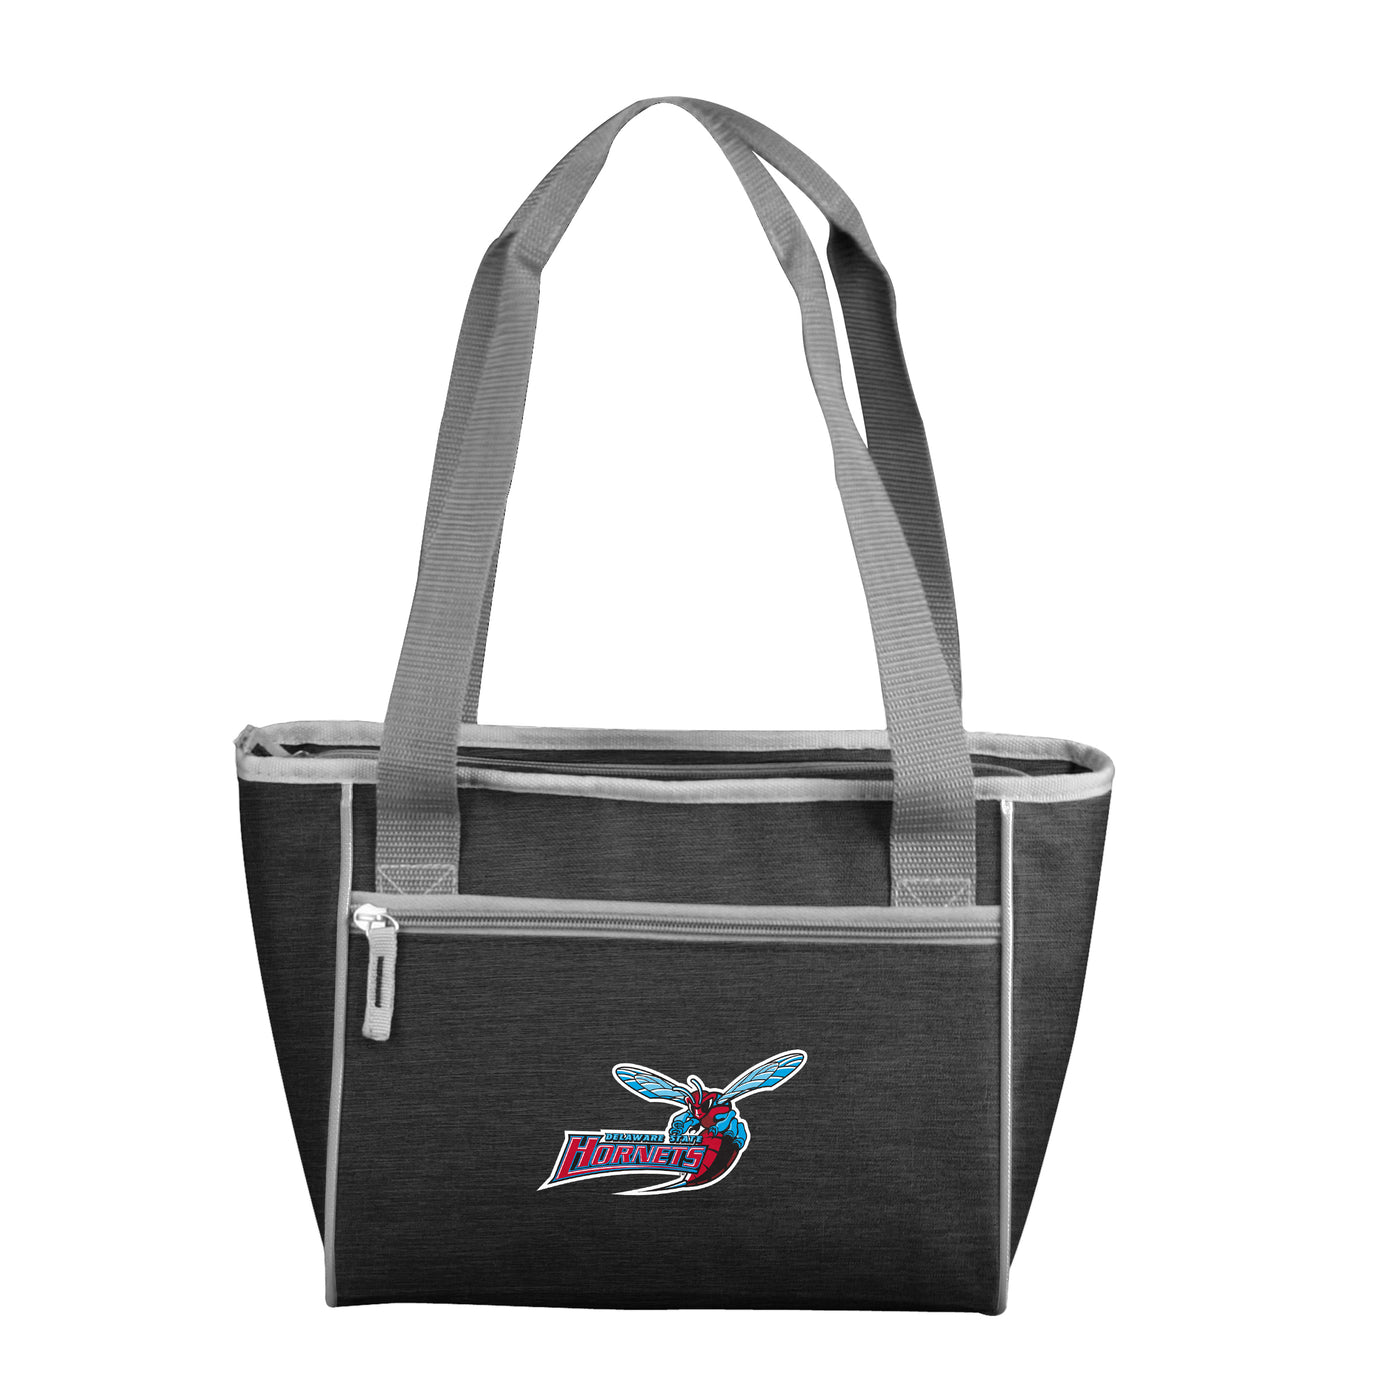 Delaware State 16 Can Cooler Tote